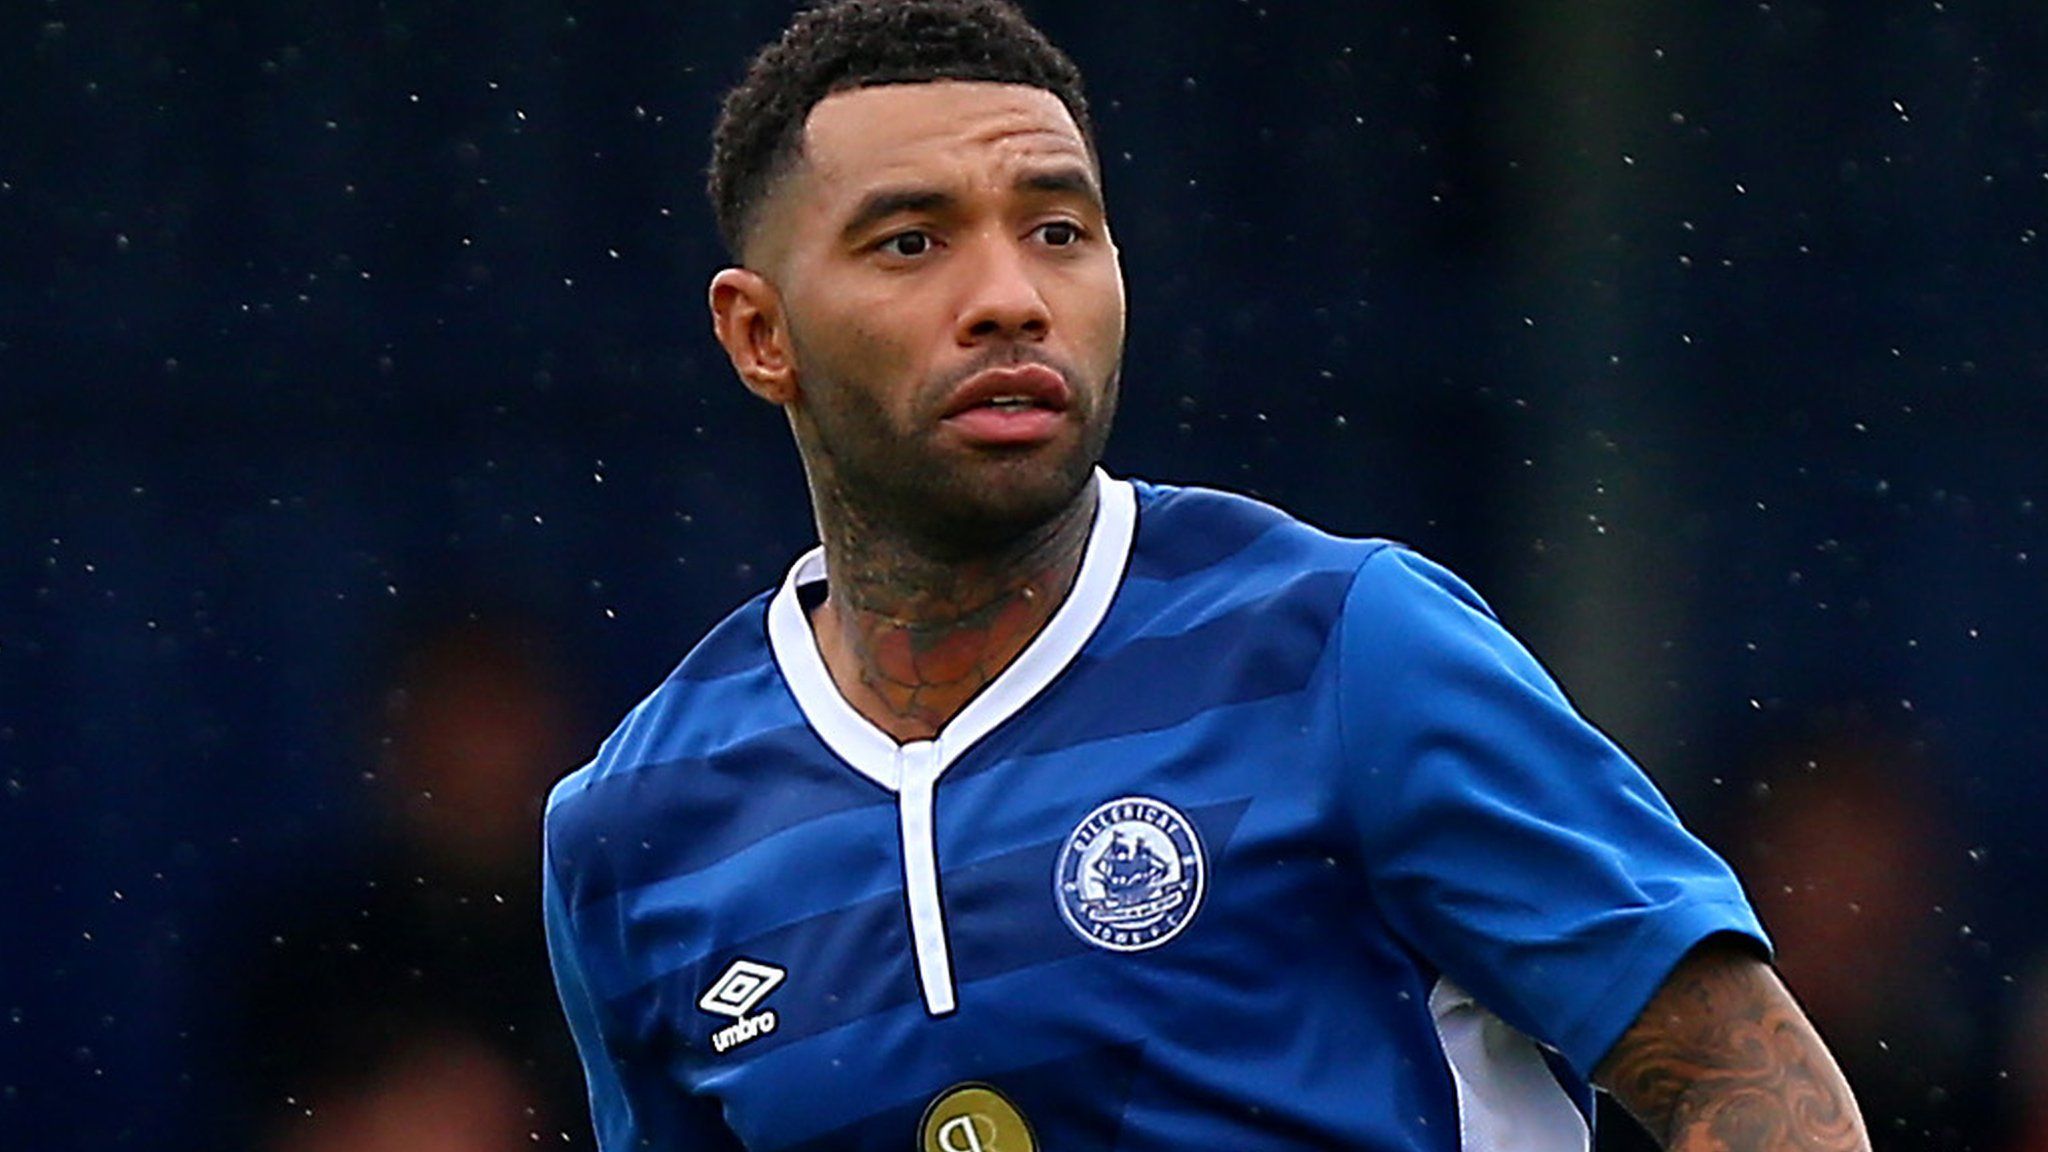 Jermaine Pennant in action for Billericay Town